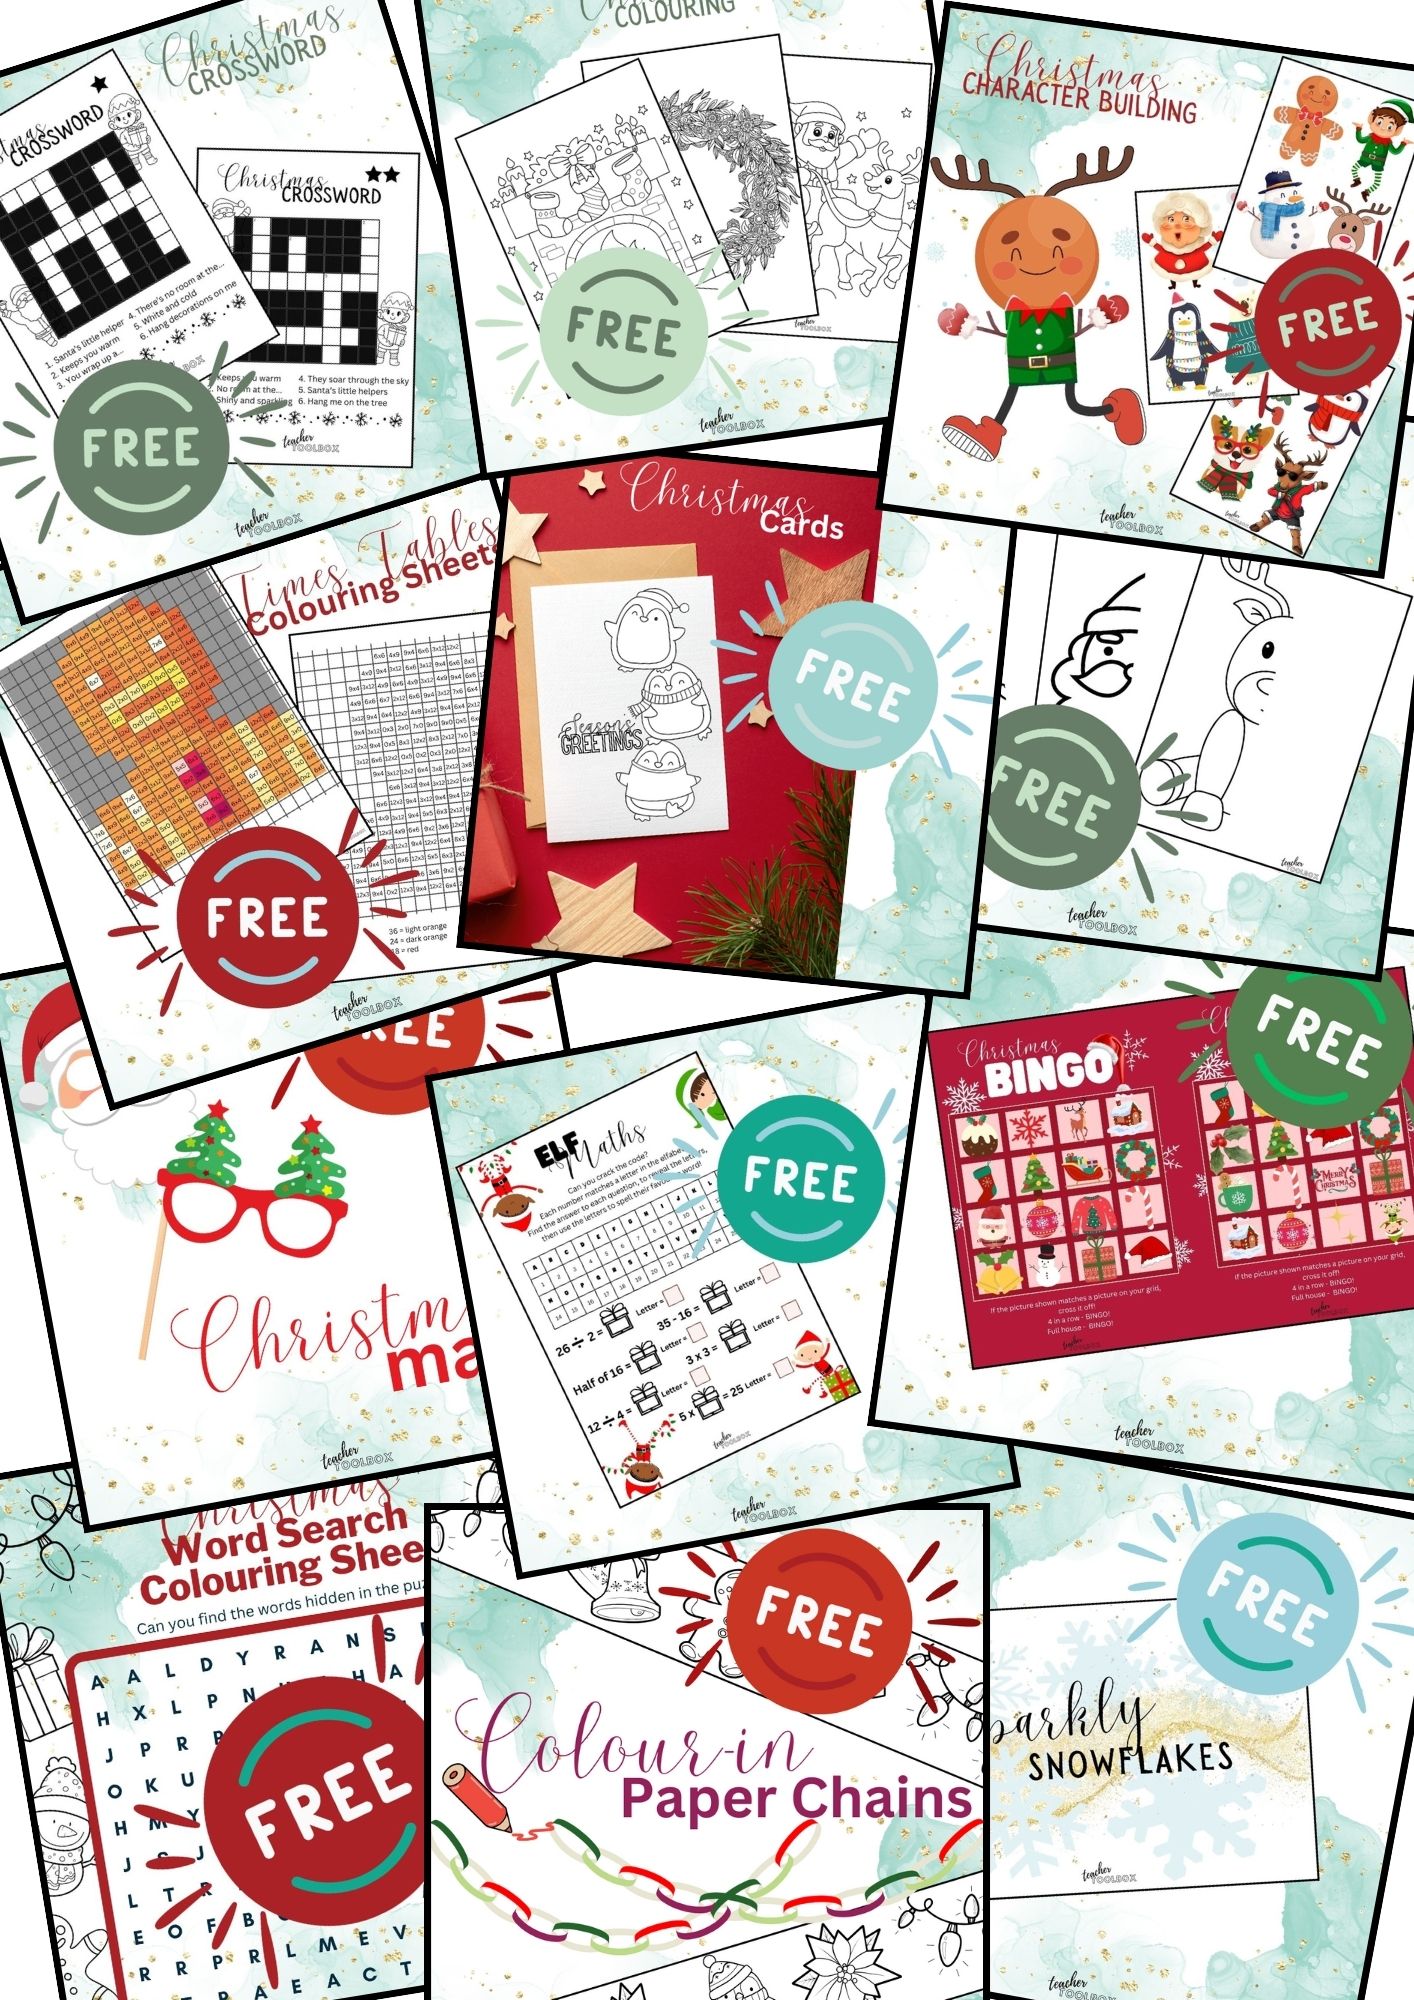 12 days of free Christmas resources for teachers